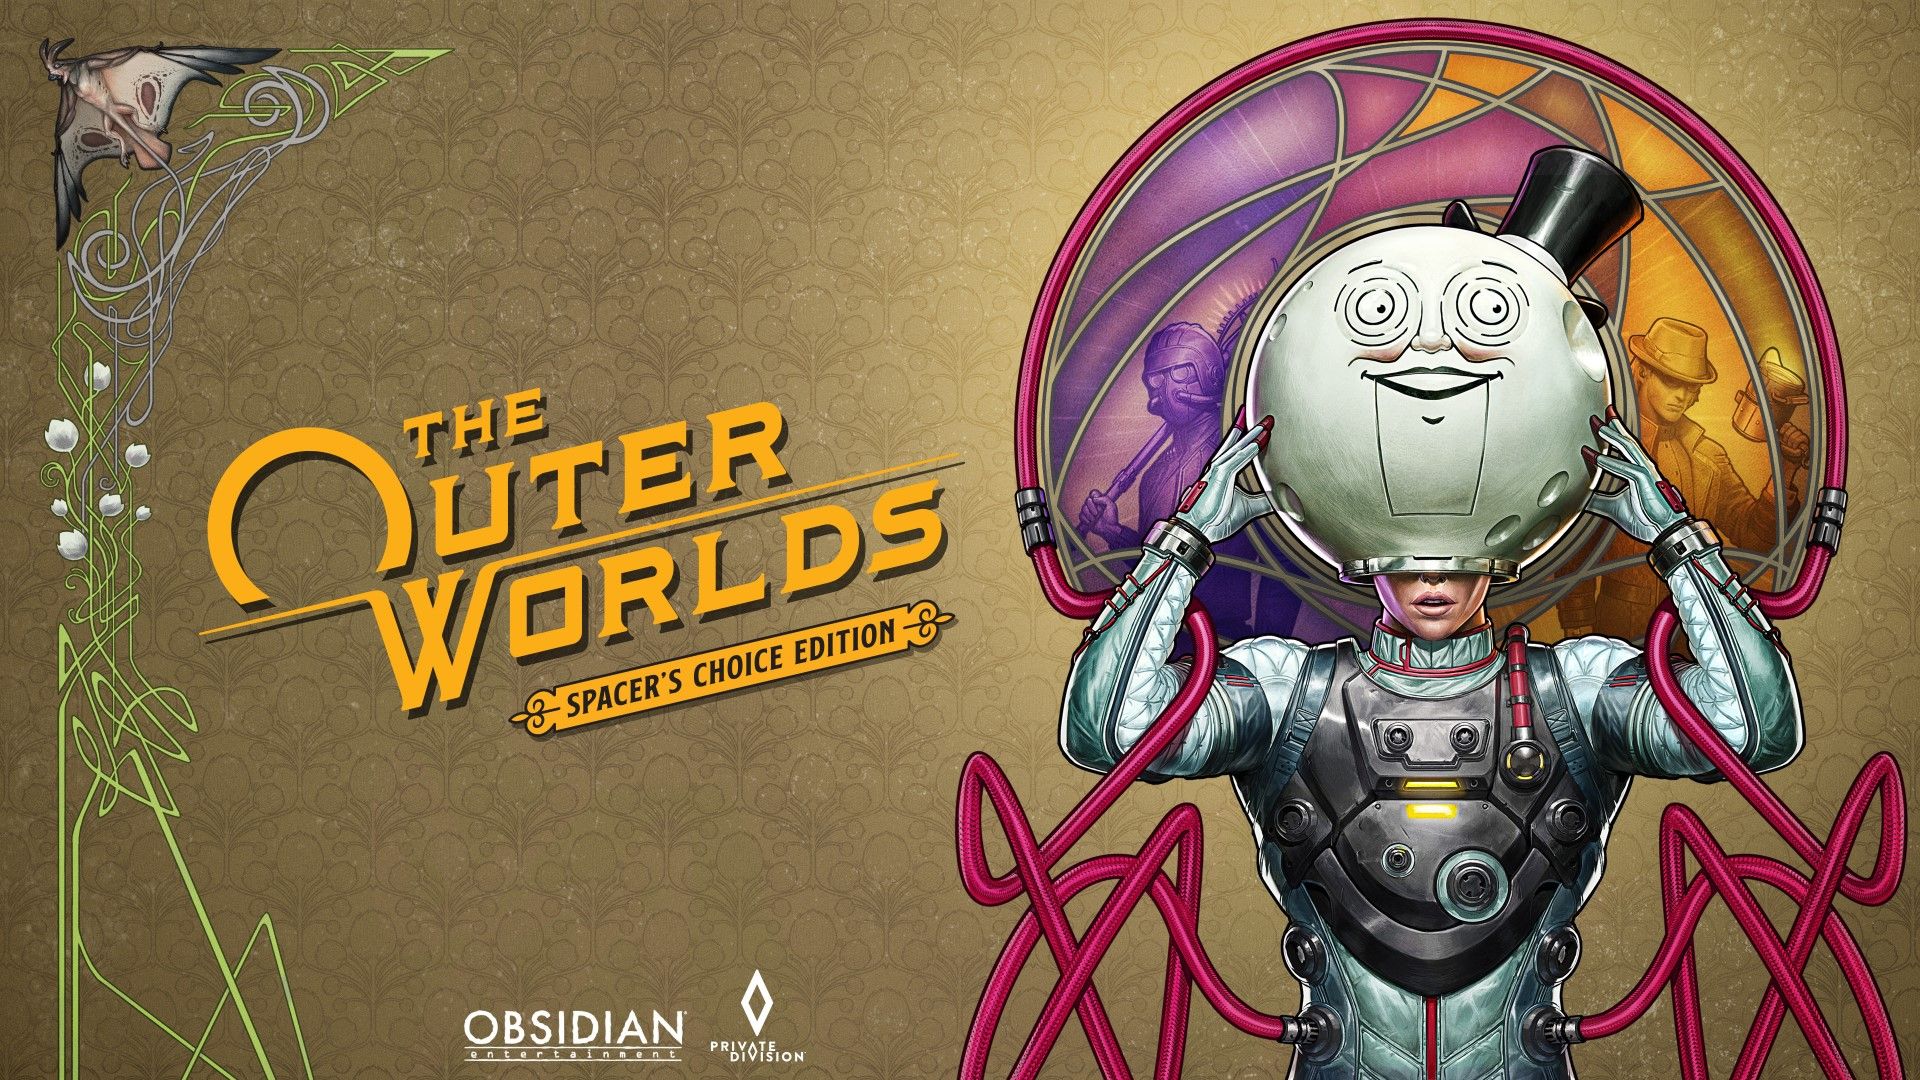 The Outer Worlds: Spacer’s Choice Edition Gets March 7 Release Date on PS5, Xbox Series X, and PC; Includes Base Game and Both DLC